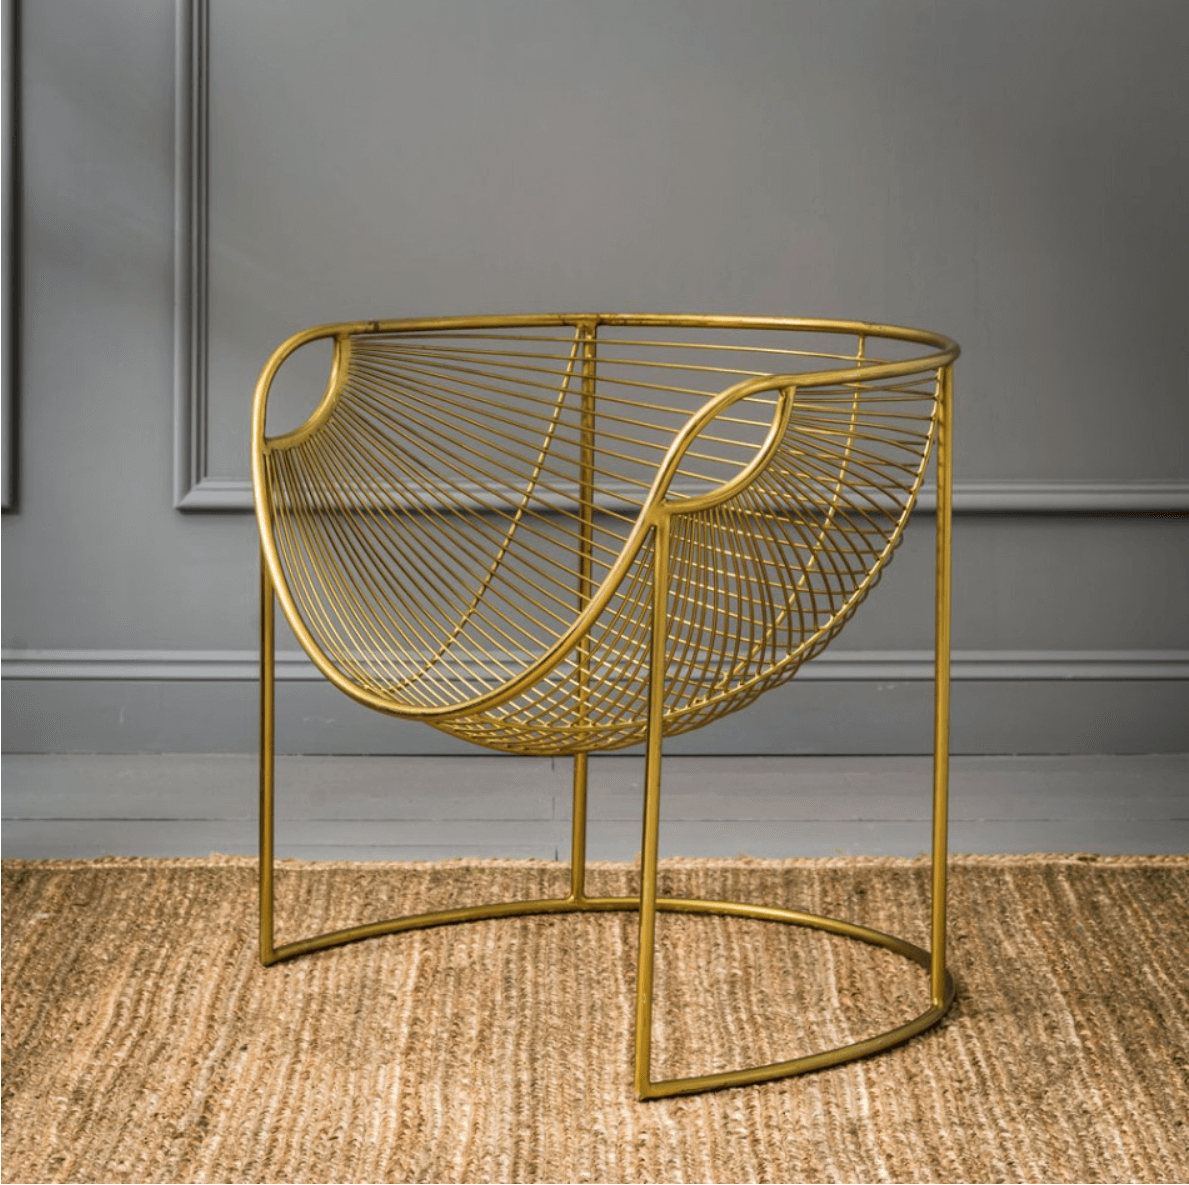 Mulberry Leaf Lounger in Gold, Graham & Green